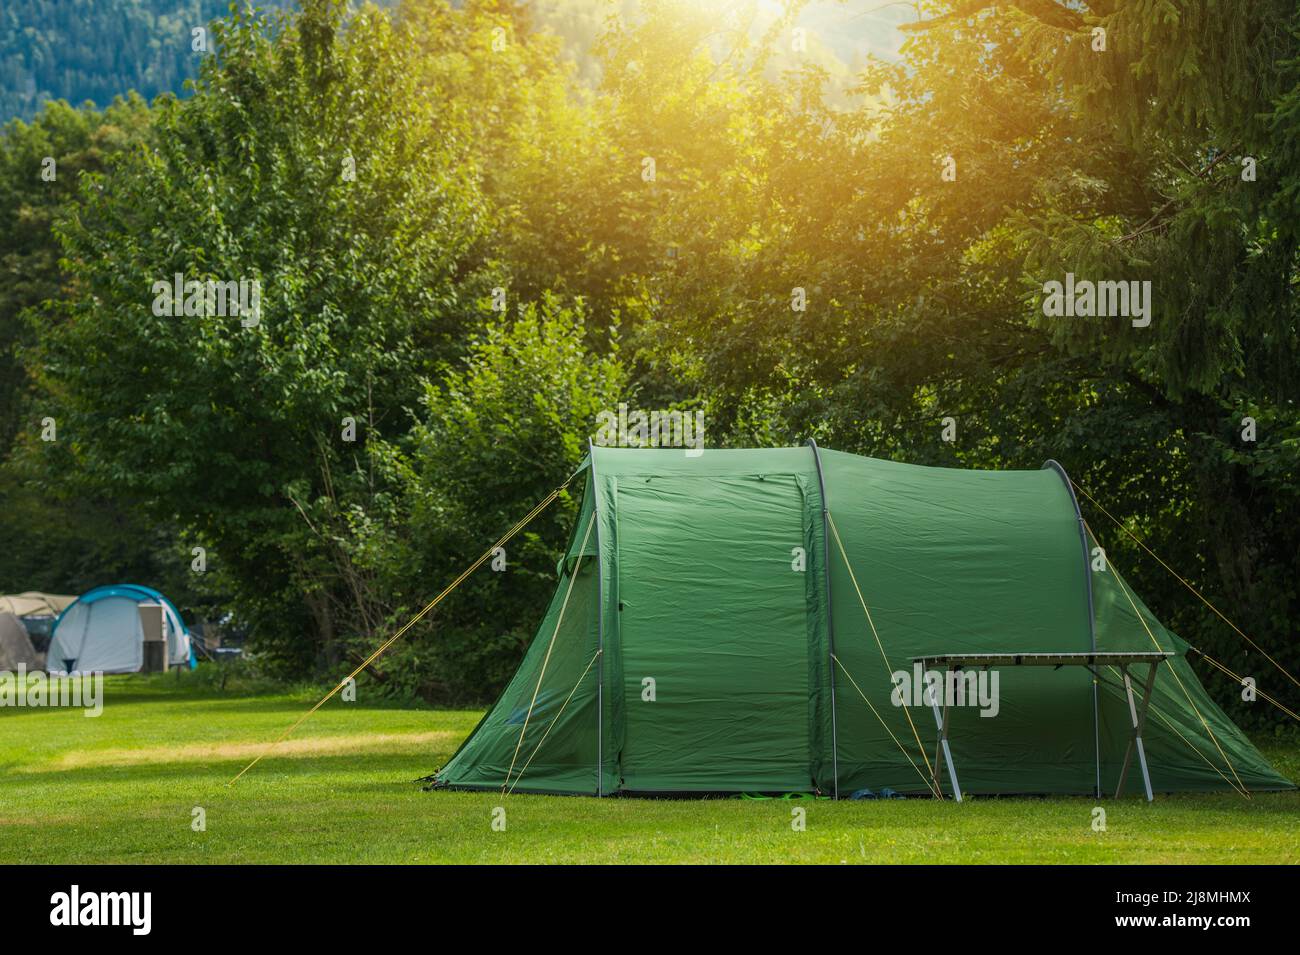 Summertime Vacation Tent Camping in the Nature. Large Green Tent and a Campsite Table. Stock Photo